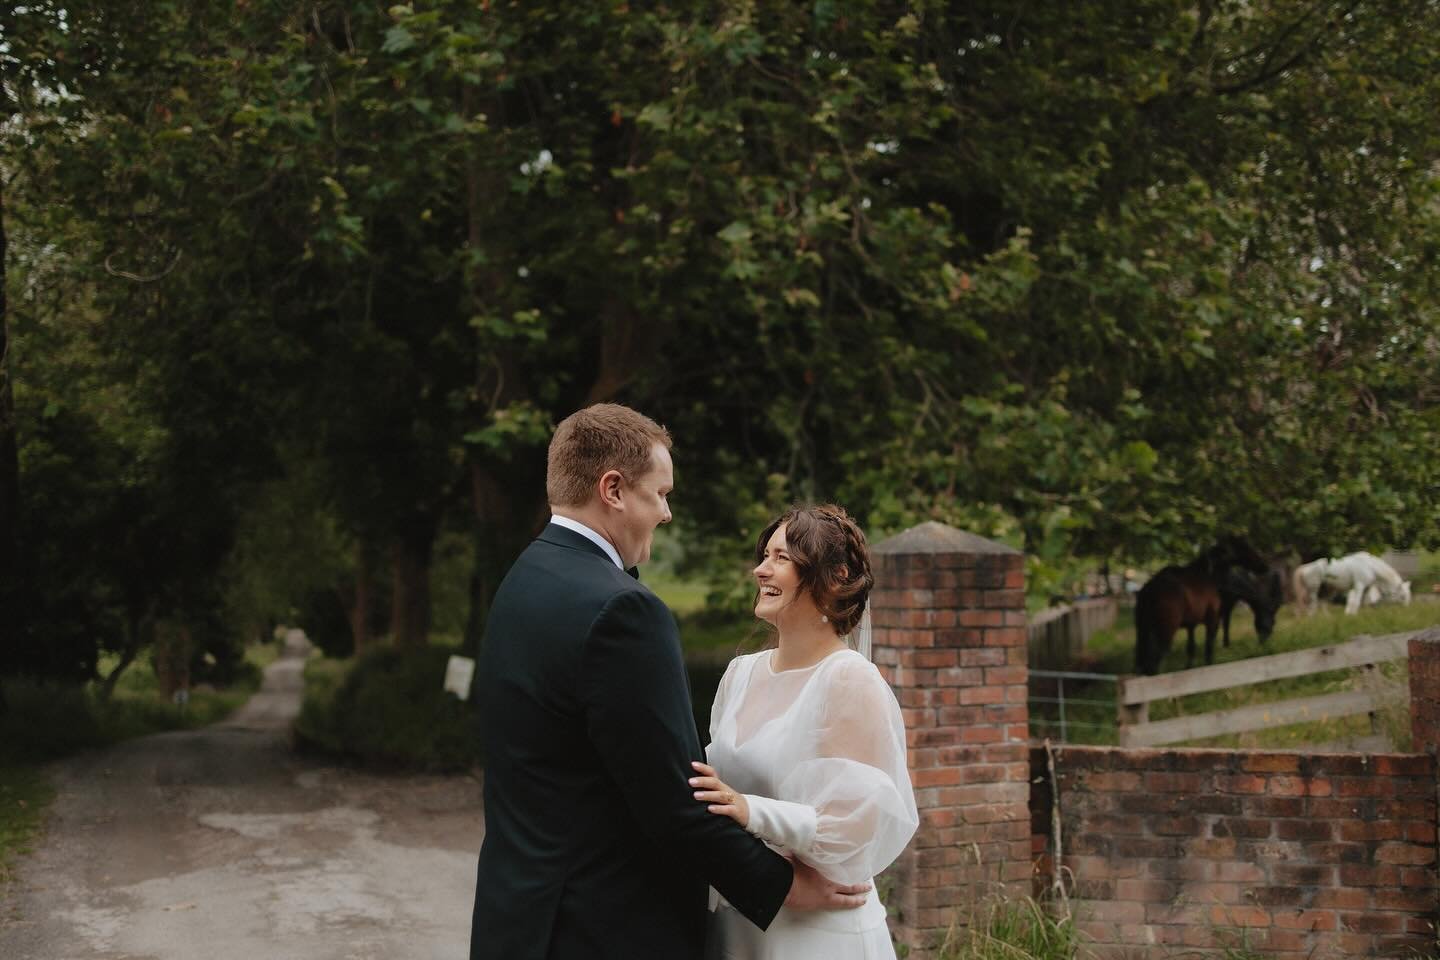 Every driveway holds countless stories, and at Longfords, it's just the beginning of your beautiful journey together 🤍

@timandnadine 
@happeaevents